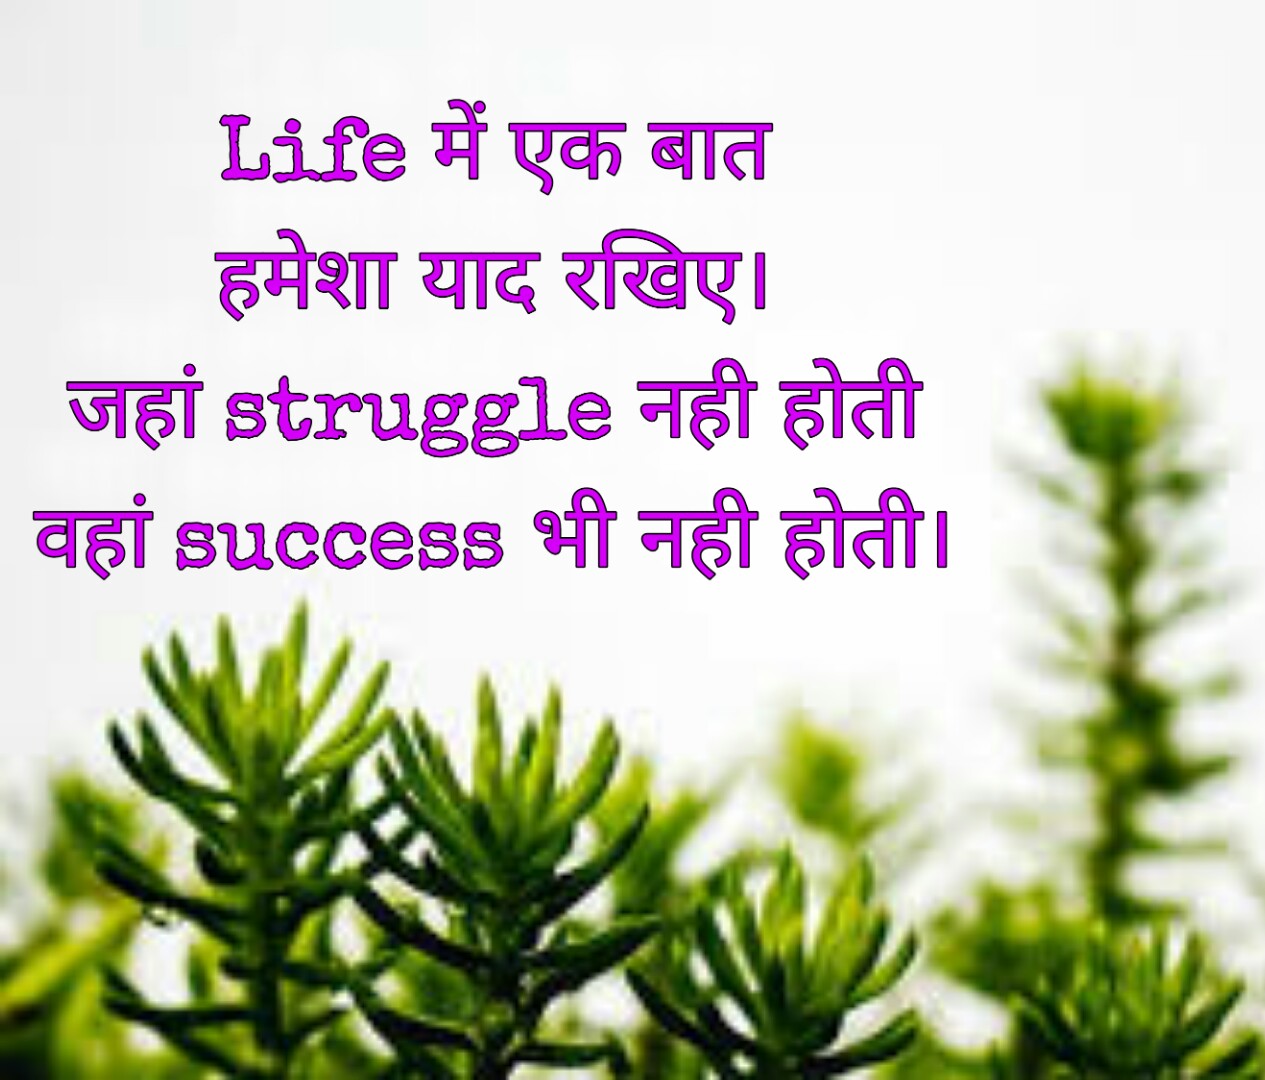 Top 13 Life quotes in hindi with images | Beautiful life quotes